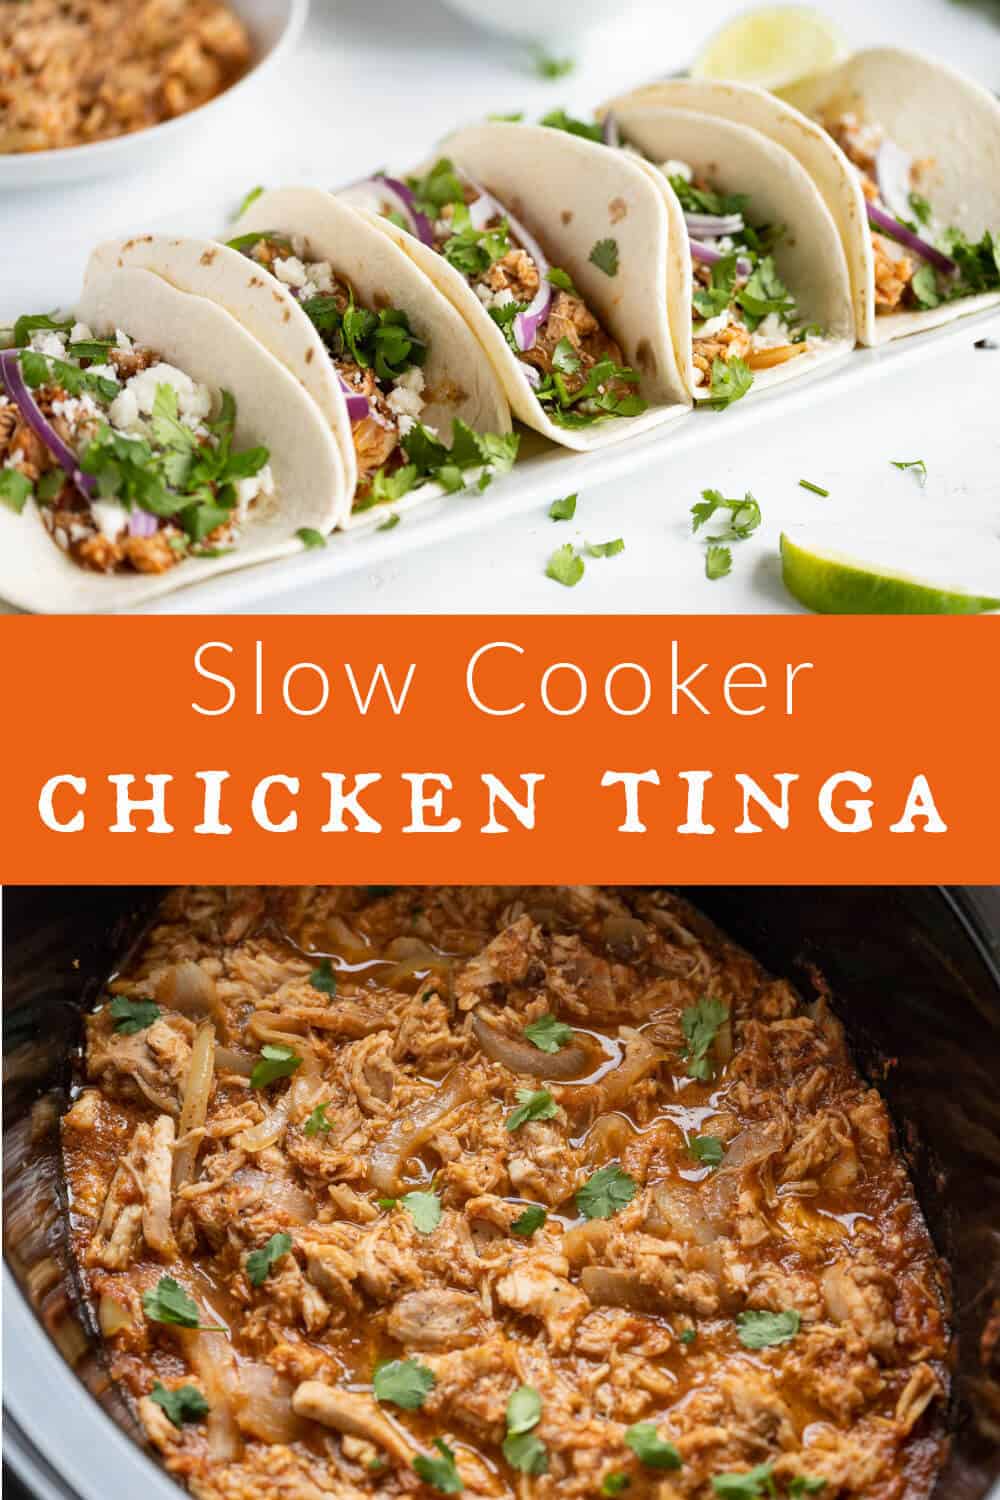 Chicken Tinga makes the most delicious shredded chicken tacos! Flavorful, tender, juicy and smoky! Cooking them is a breeze in your slow cooker. Also works perfectly for Enchiladas, Burritos, Tostadas, Nachos, and all your favorite Mexican Inspired dishes! #chickentinga #slowcooker #crockpot via @artfrommytable